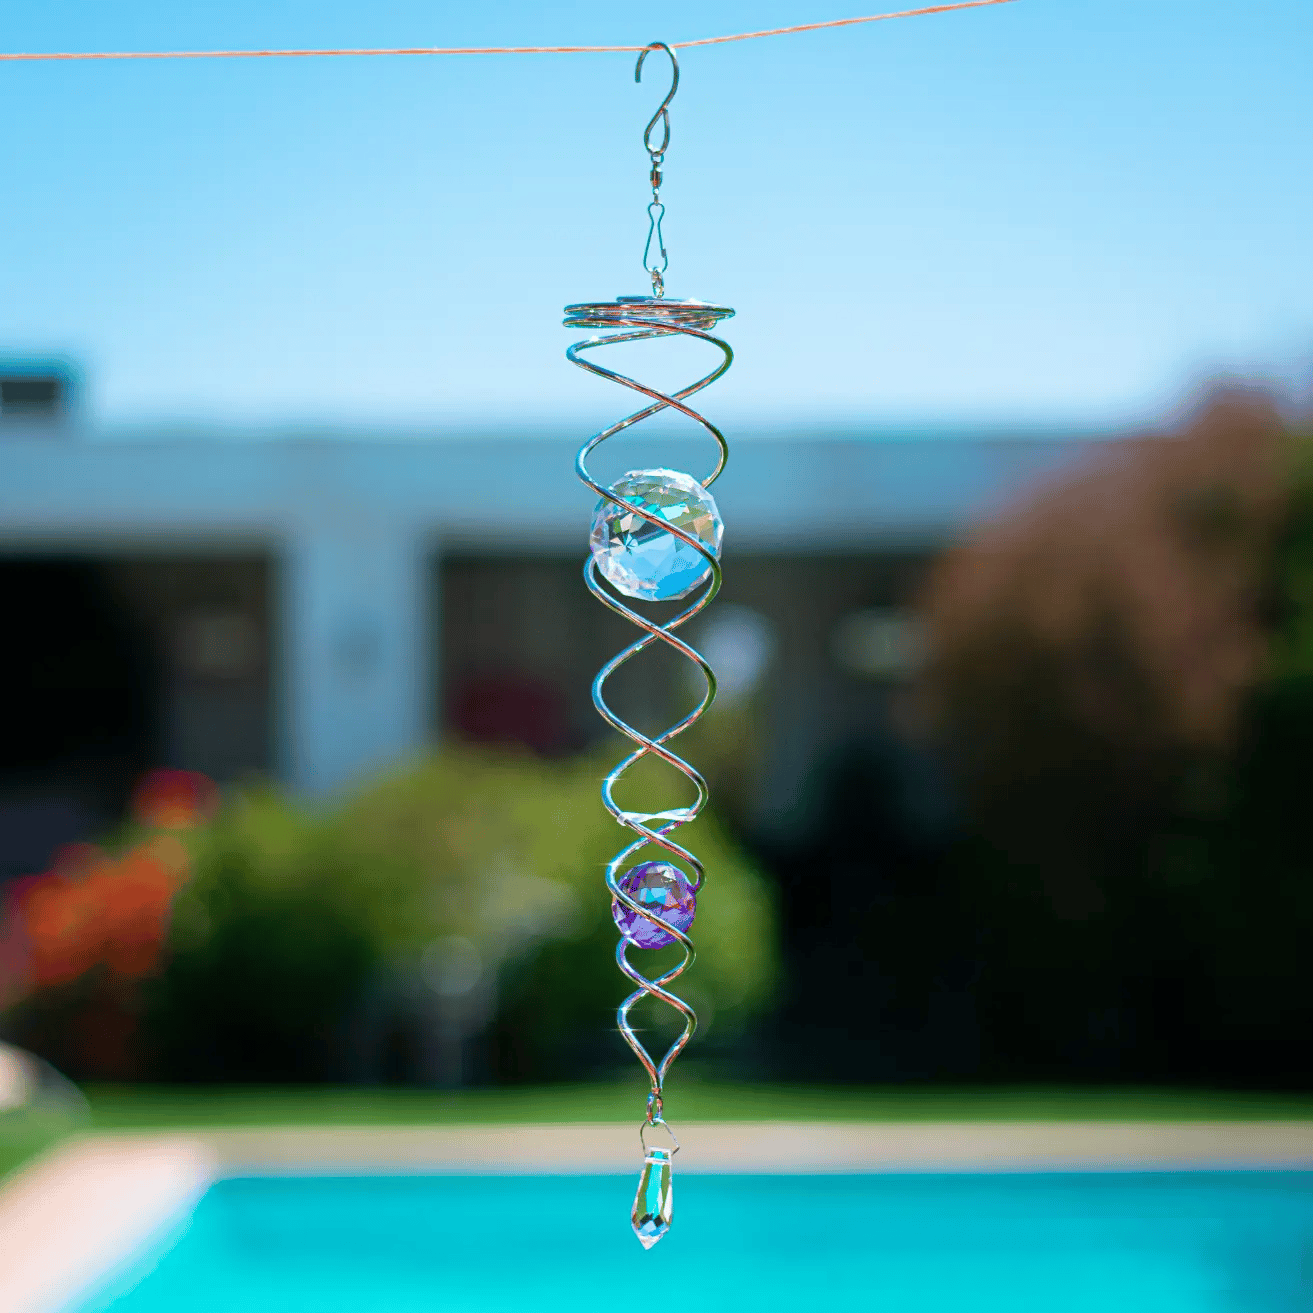 🔥Spring Hot Sale 49% OFF🎐Dynamic wind chimes that rotate with the wind